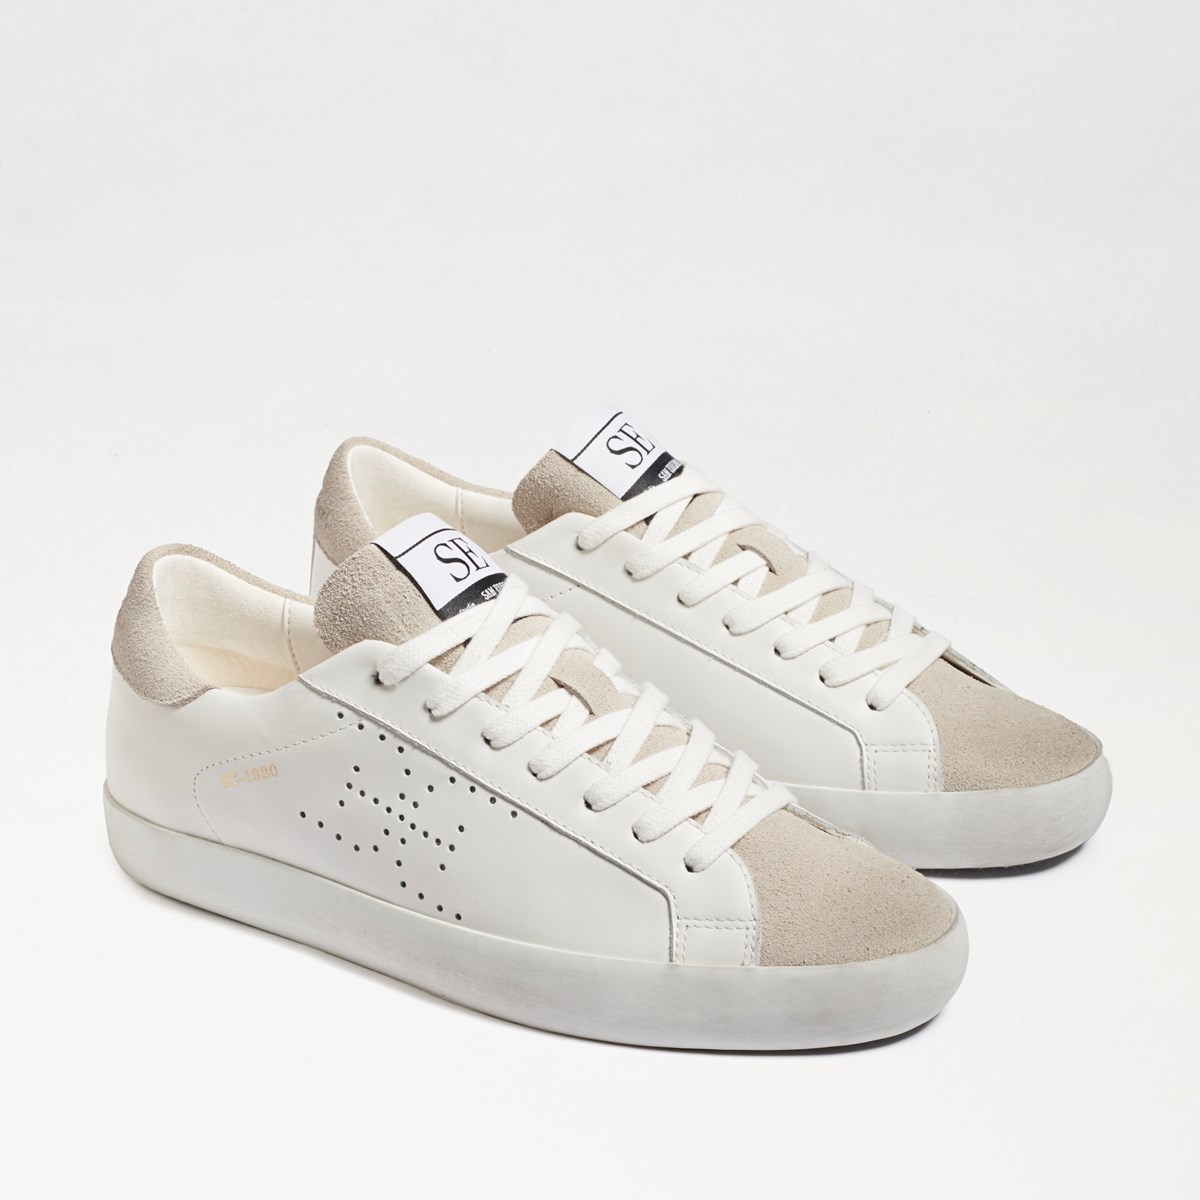 Aubrie Lace Up Sneaker White/Light Grey | Womens Sneakers | Sam Edelman